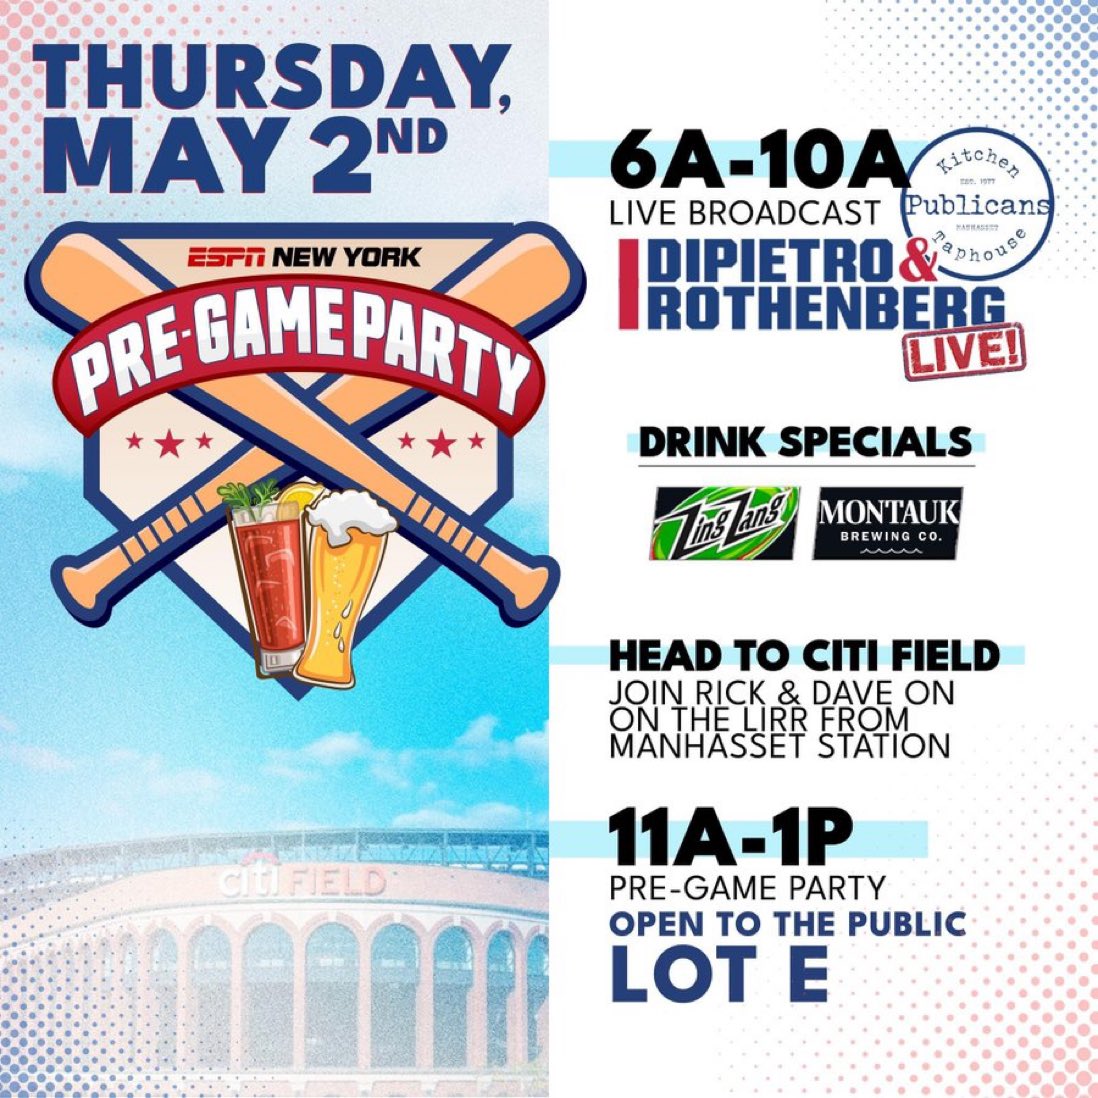 The 2nd Annual @DRonESPN Pregame Party is coming up on Thursday, May 2nd! Come out to see the LIVE broadcast at Publicans, just steps away from the LIRR, then take the train with the crew to Citi Field for the game vs. the Cubs! BROUGHT TO YOU BY: @montaukbrewco & @ZingZangMix